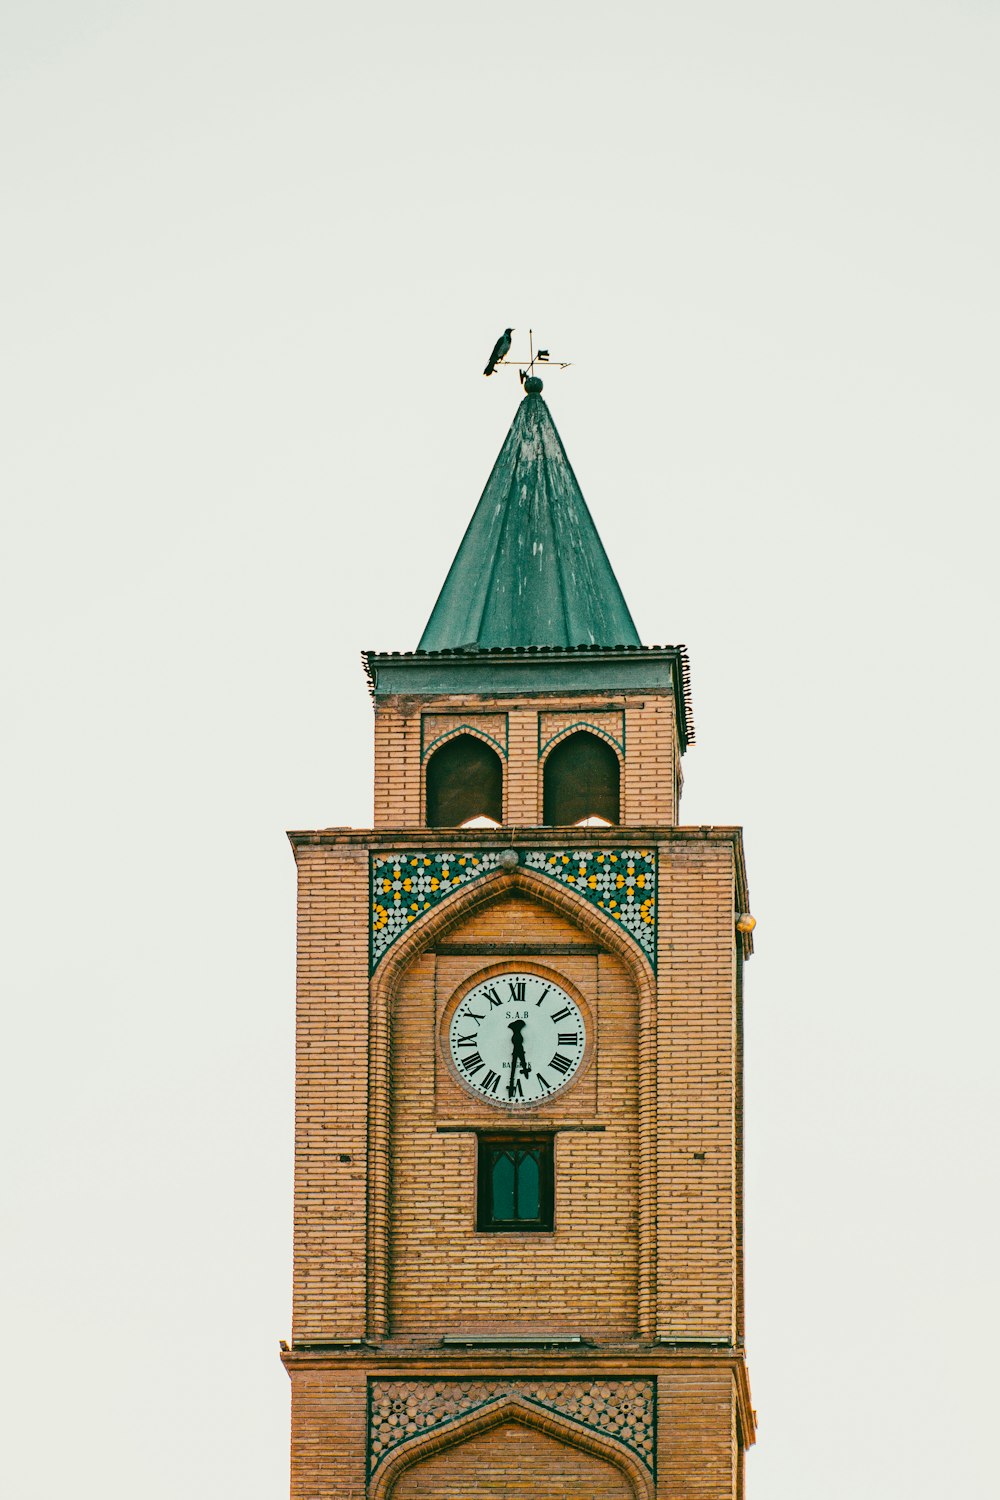 a clock on a tower